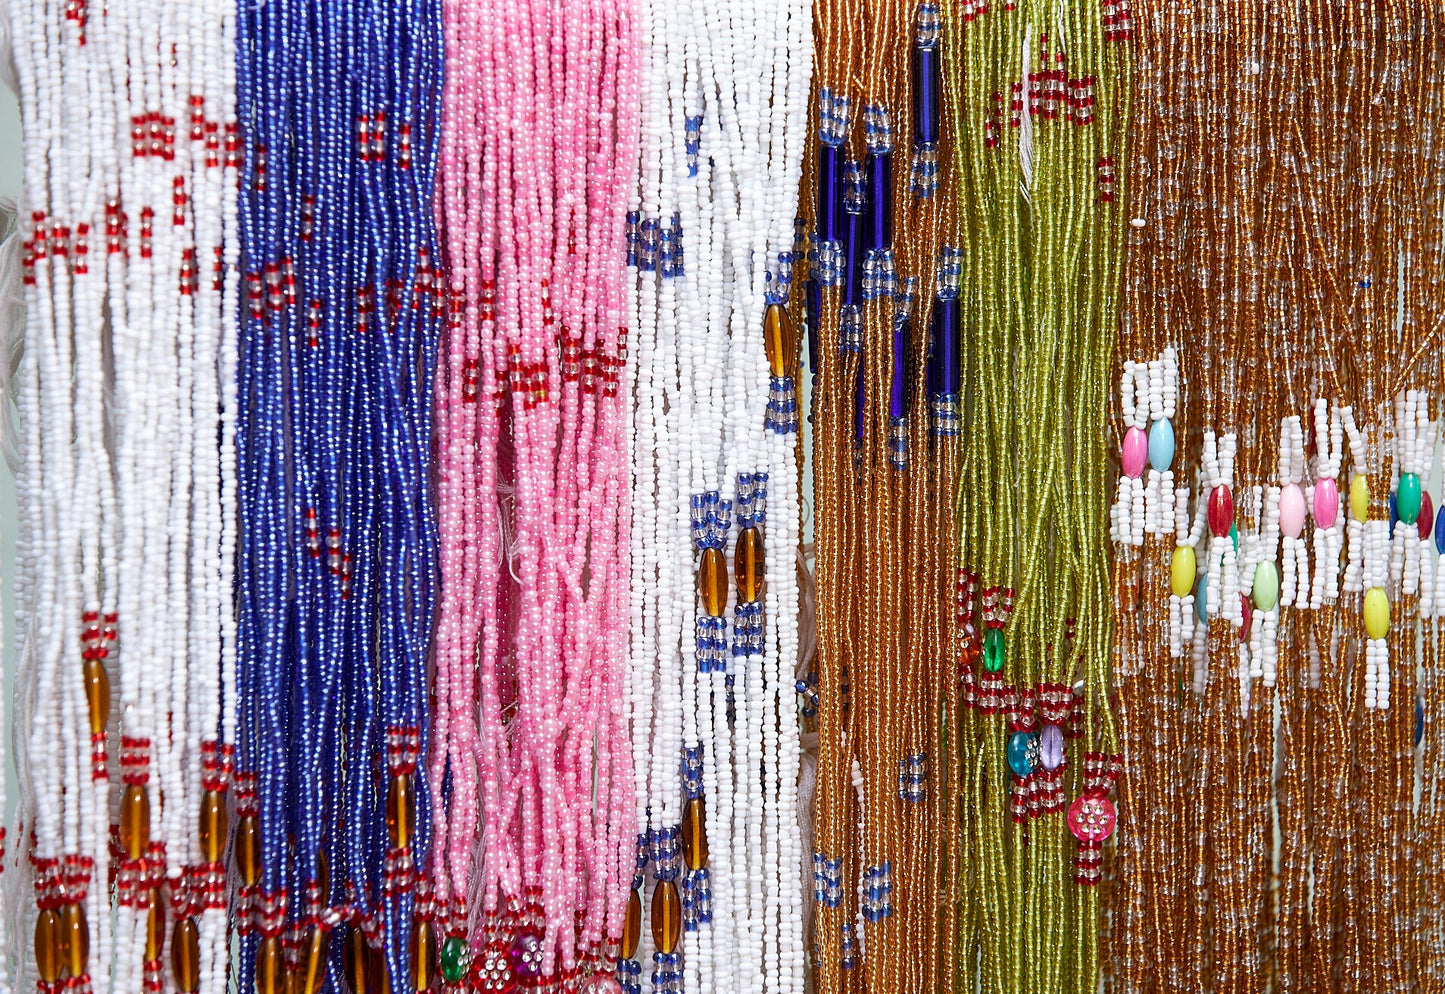 Wholesale (Bulk) Rare South African Waist Beads With Removable Screws –  Affrodive Prints